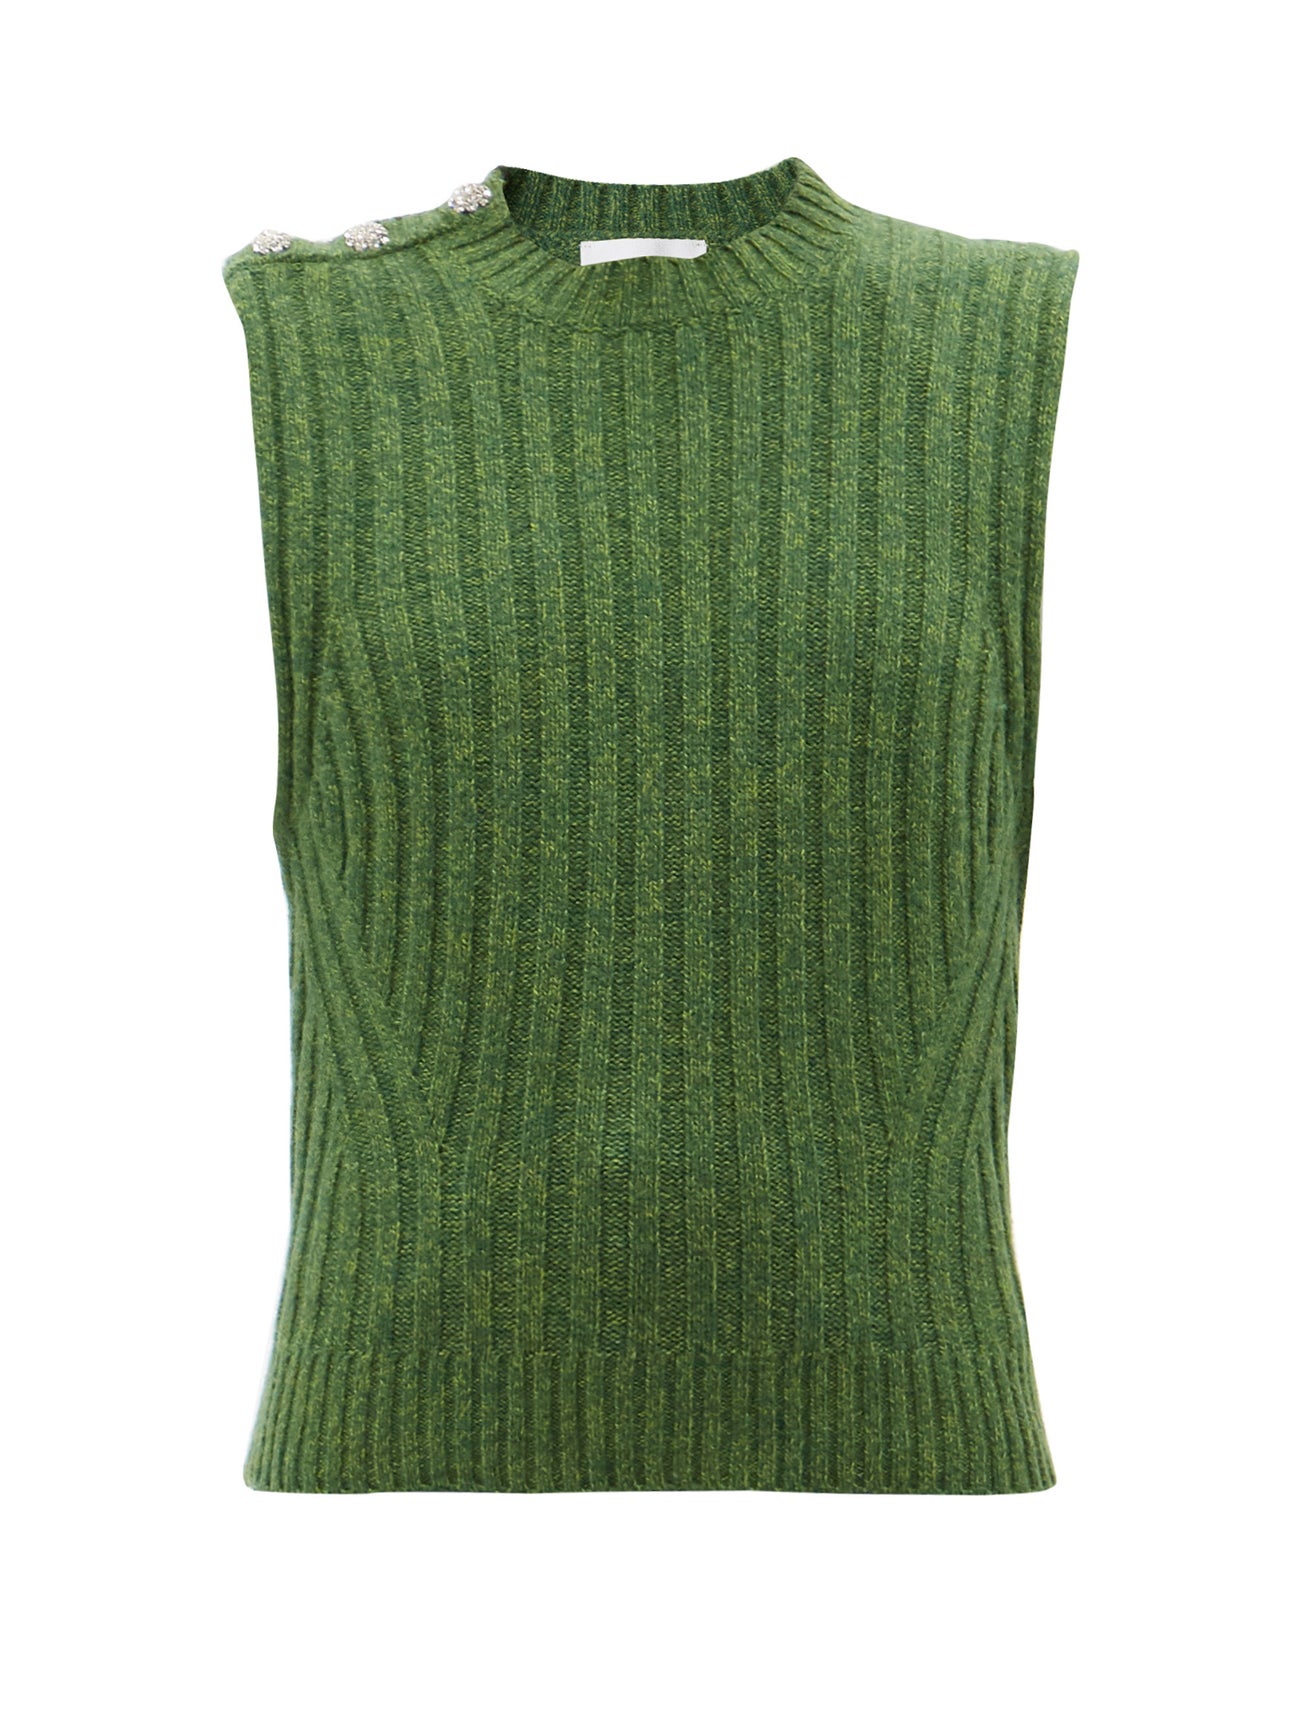 13 Stylish Ways to Wear the Knitted-Vest Trend | Who What Wear UK